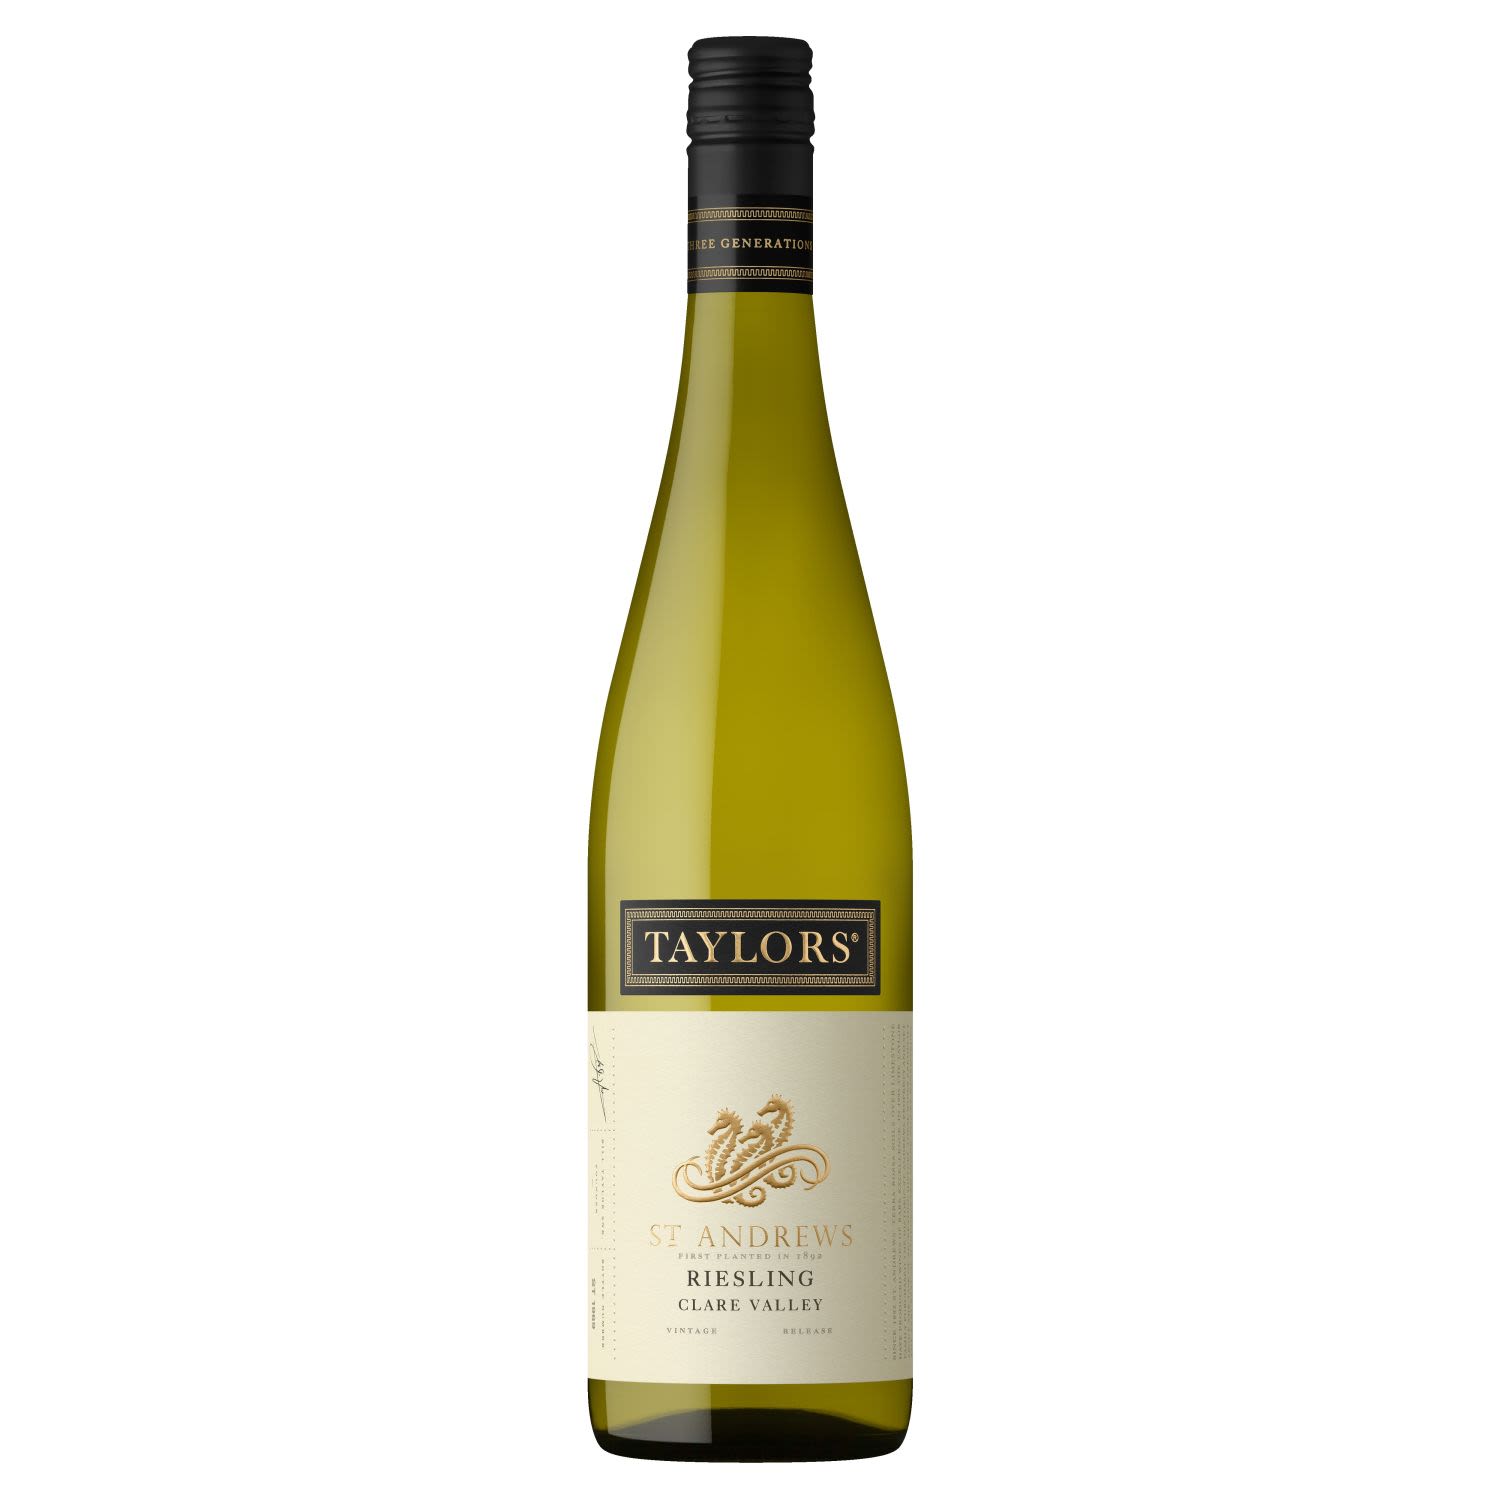 Taylors St Andrews Riesling 750mL Bottle